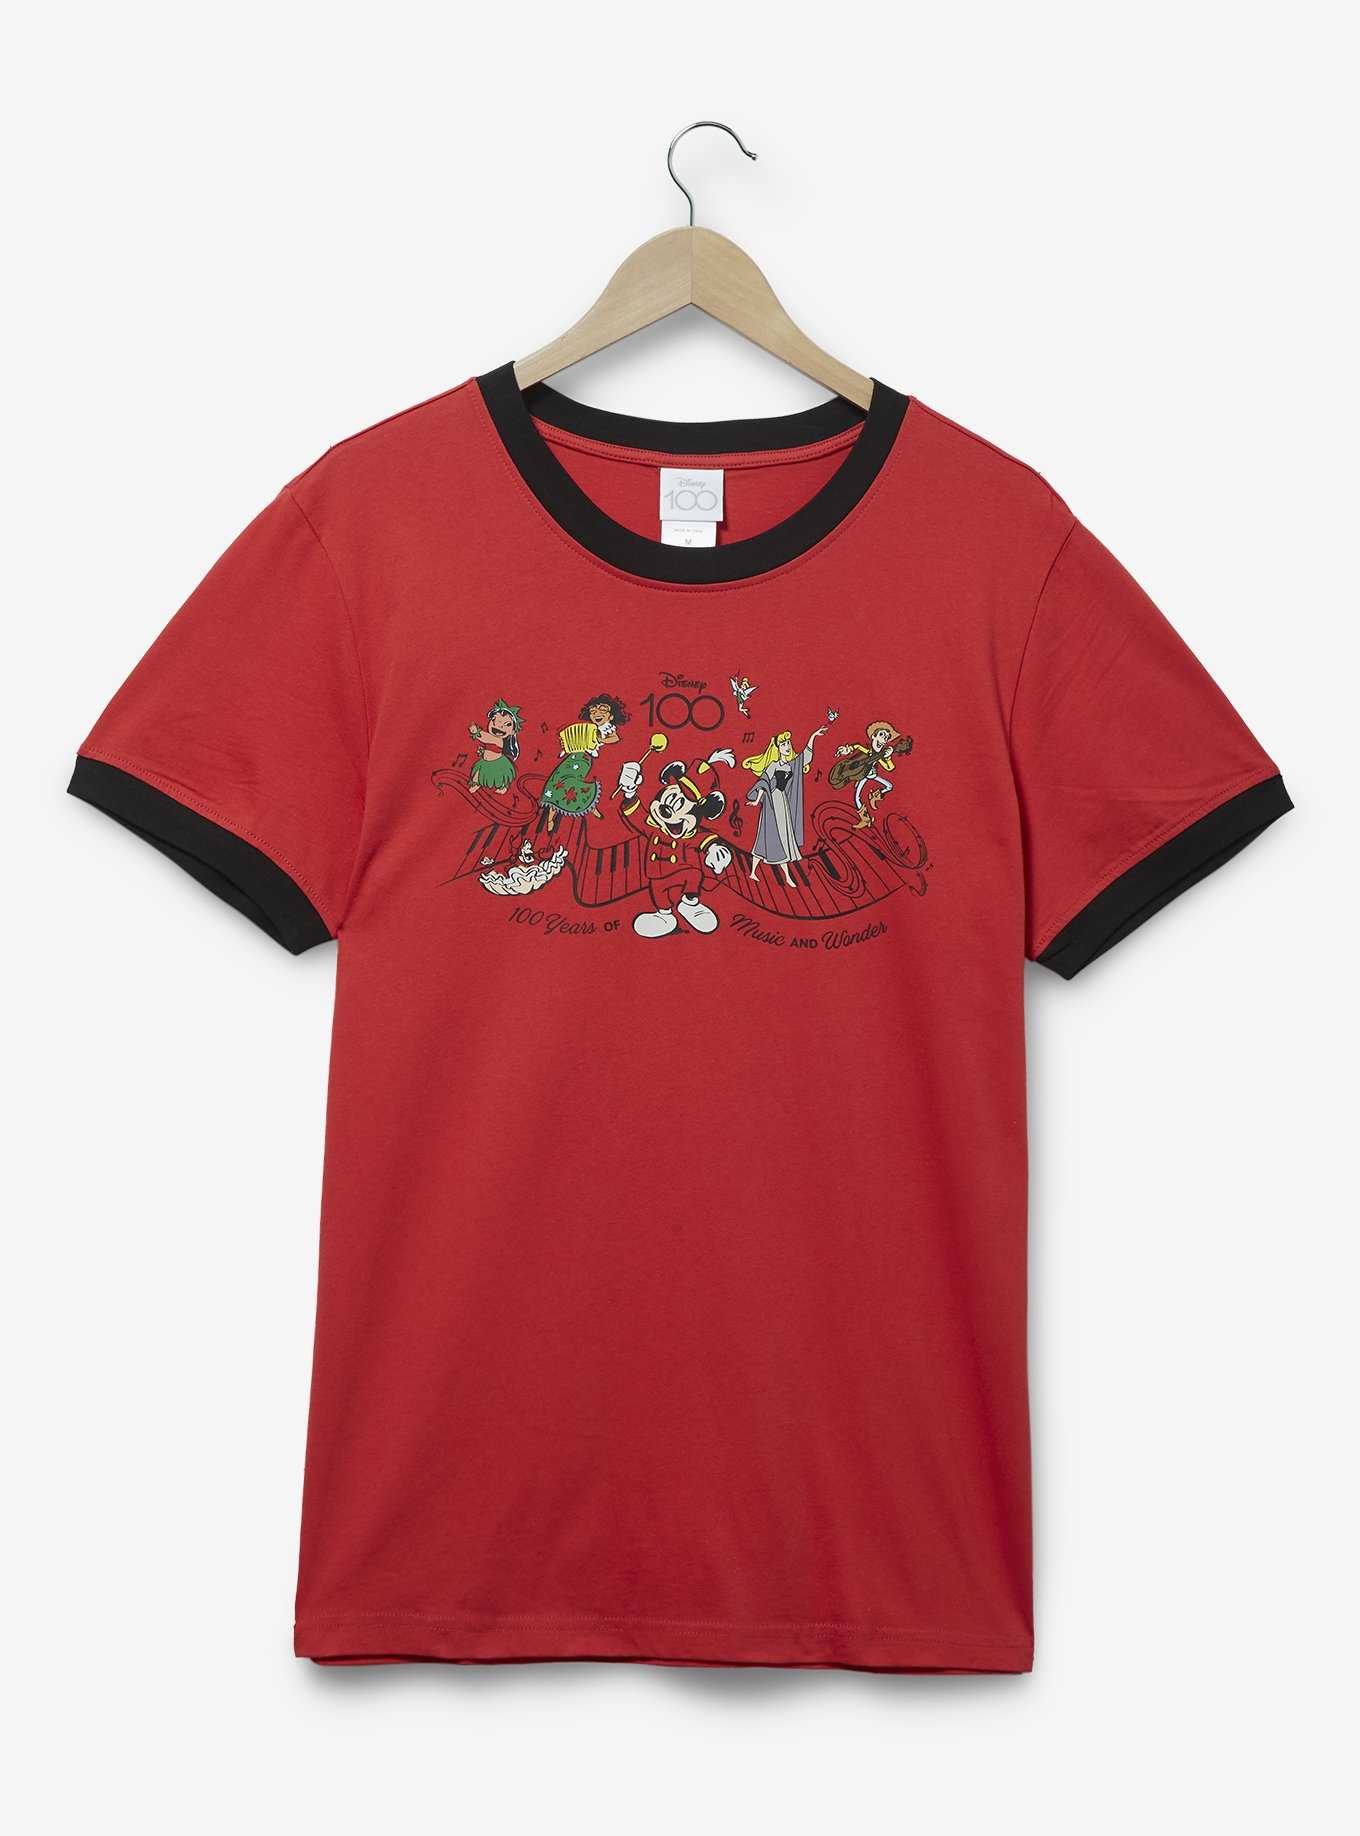 Disney 100 Musical Characters Ringer T-Shirt - BoxLunch Exclusive, , hi-res